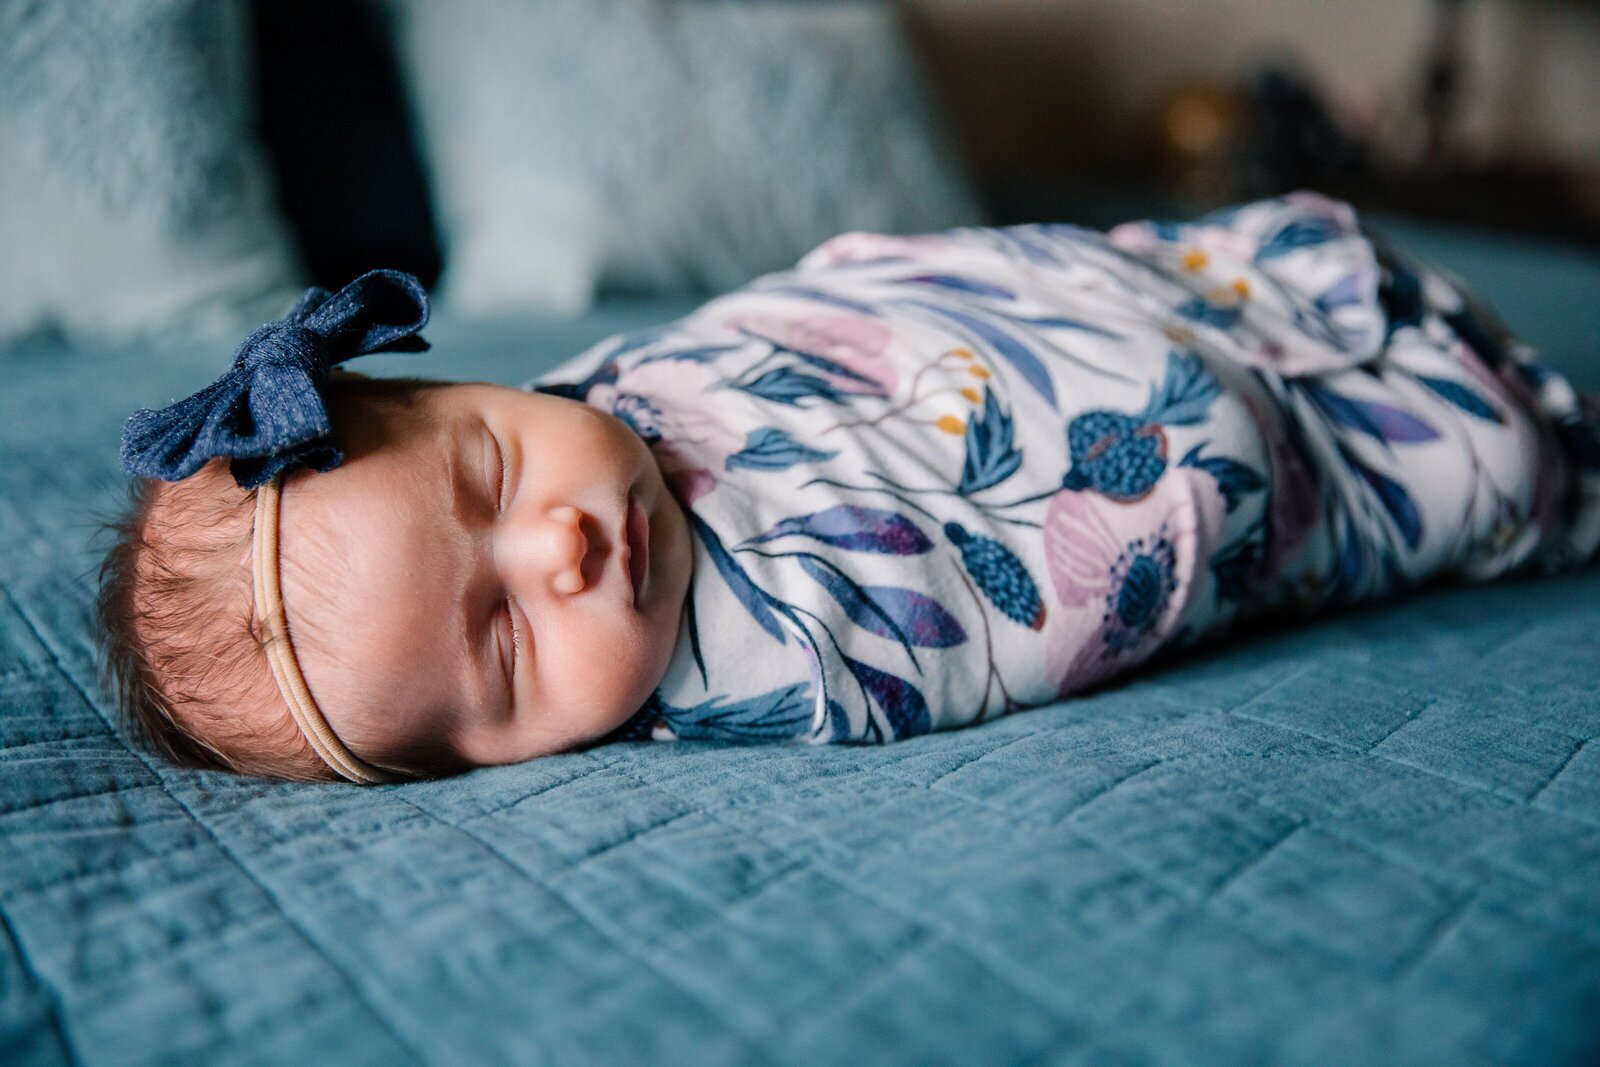 Newborn daughter in floral wrap lying on parent's bed during in-home photo session.